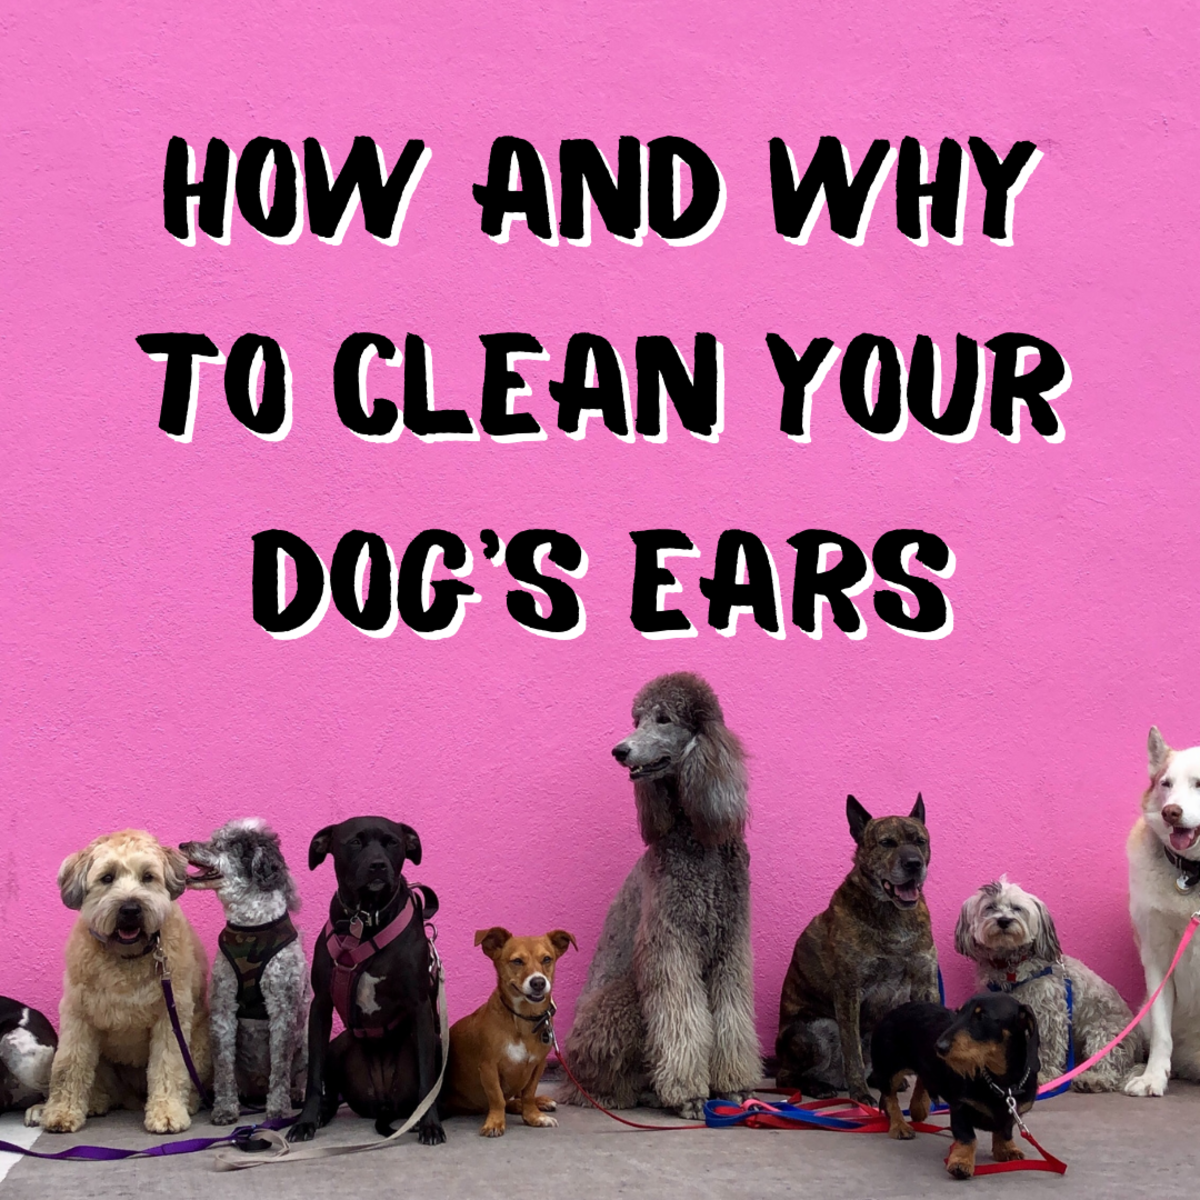 This article discusses the reasons why you should clean your dog's ears and provides a useful how-to guide for performing the procedure yourself.